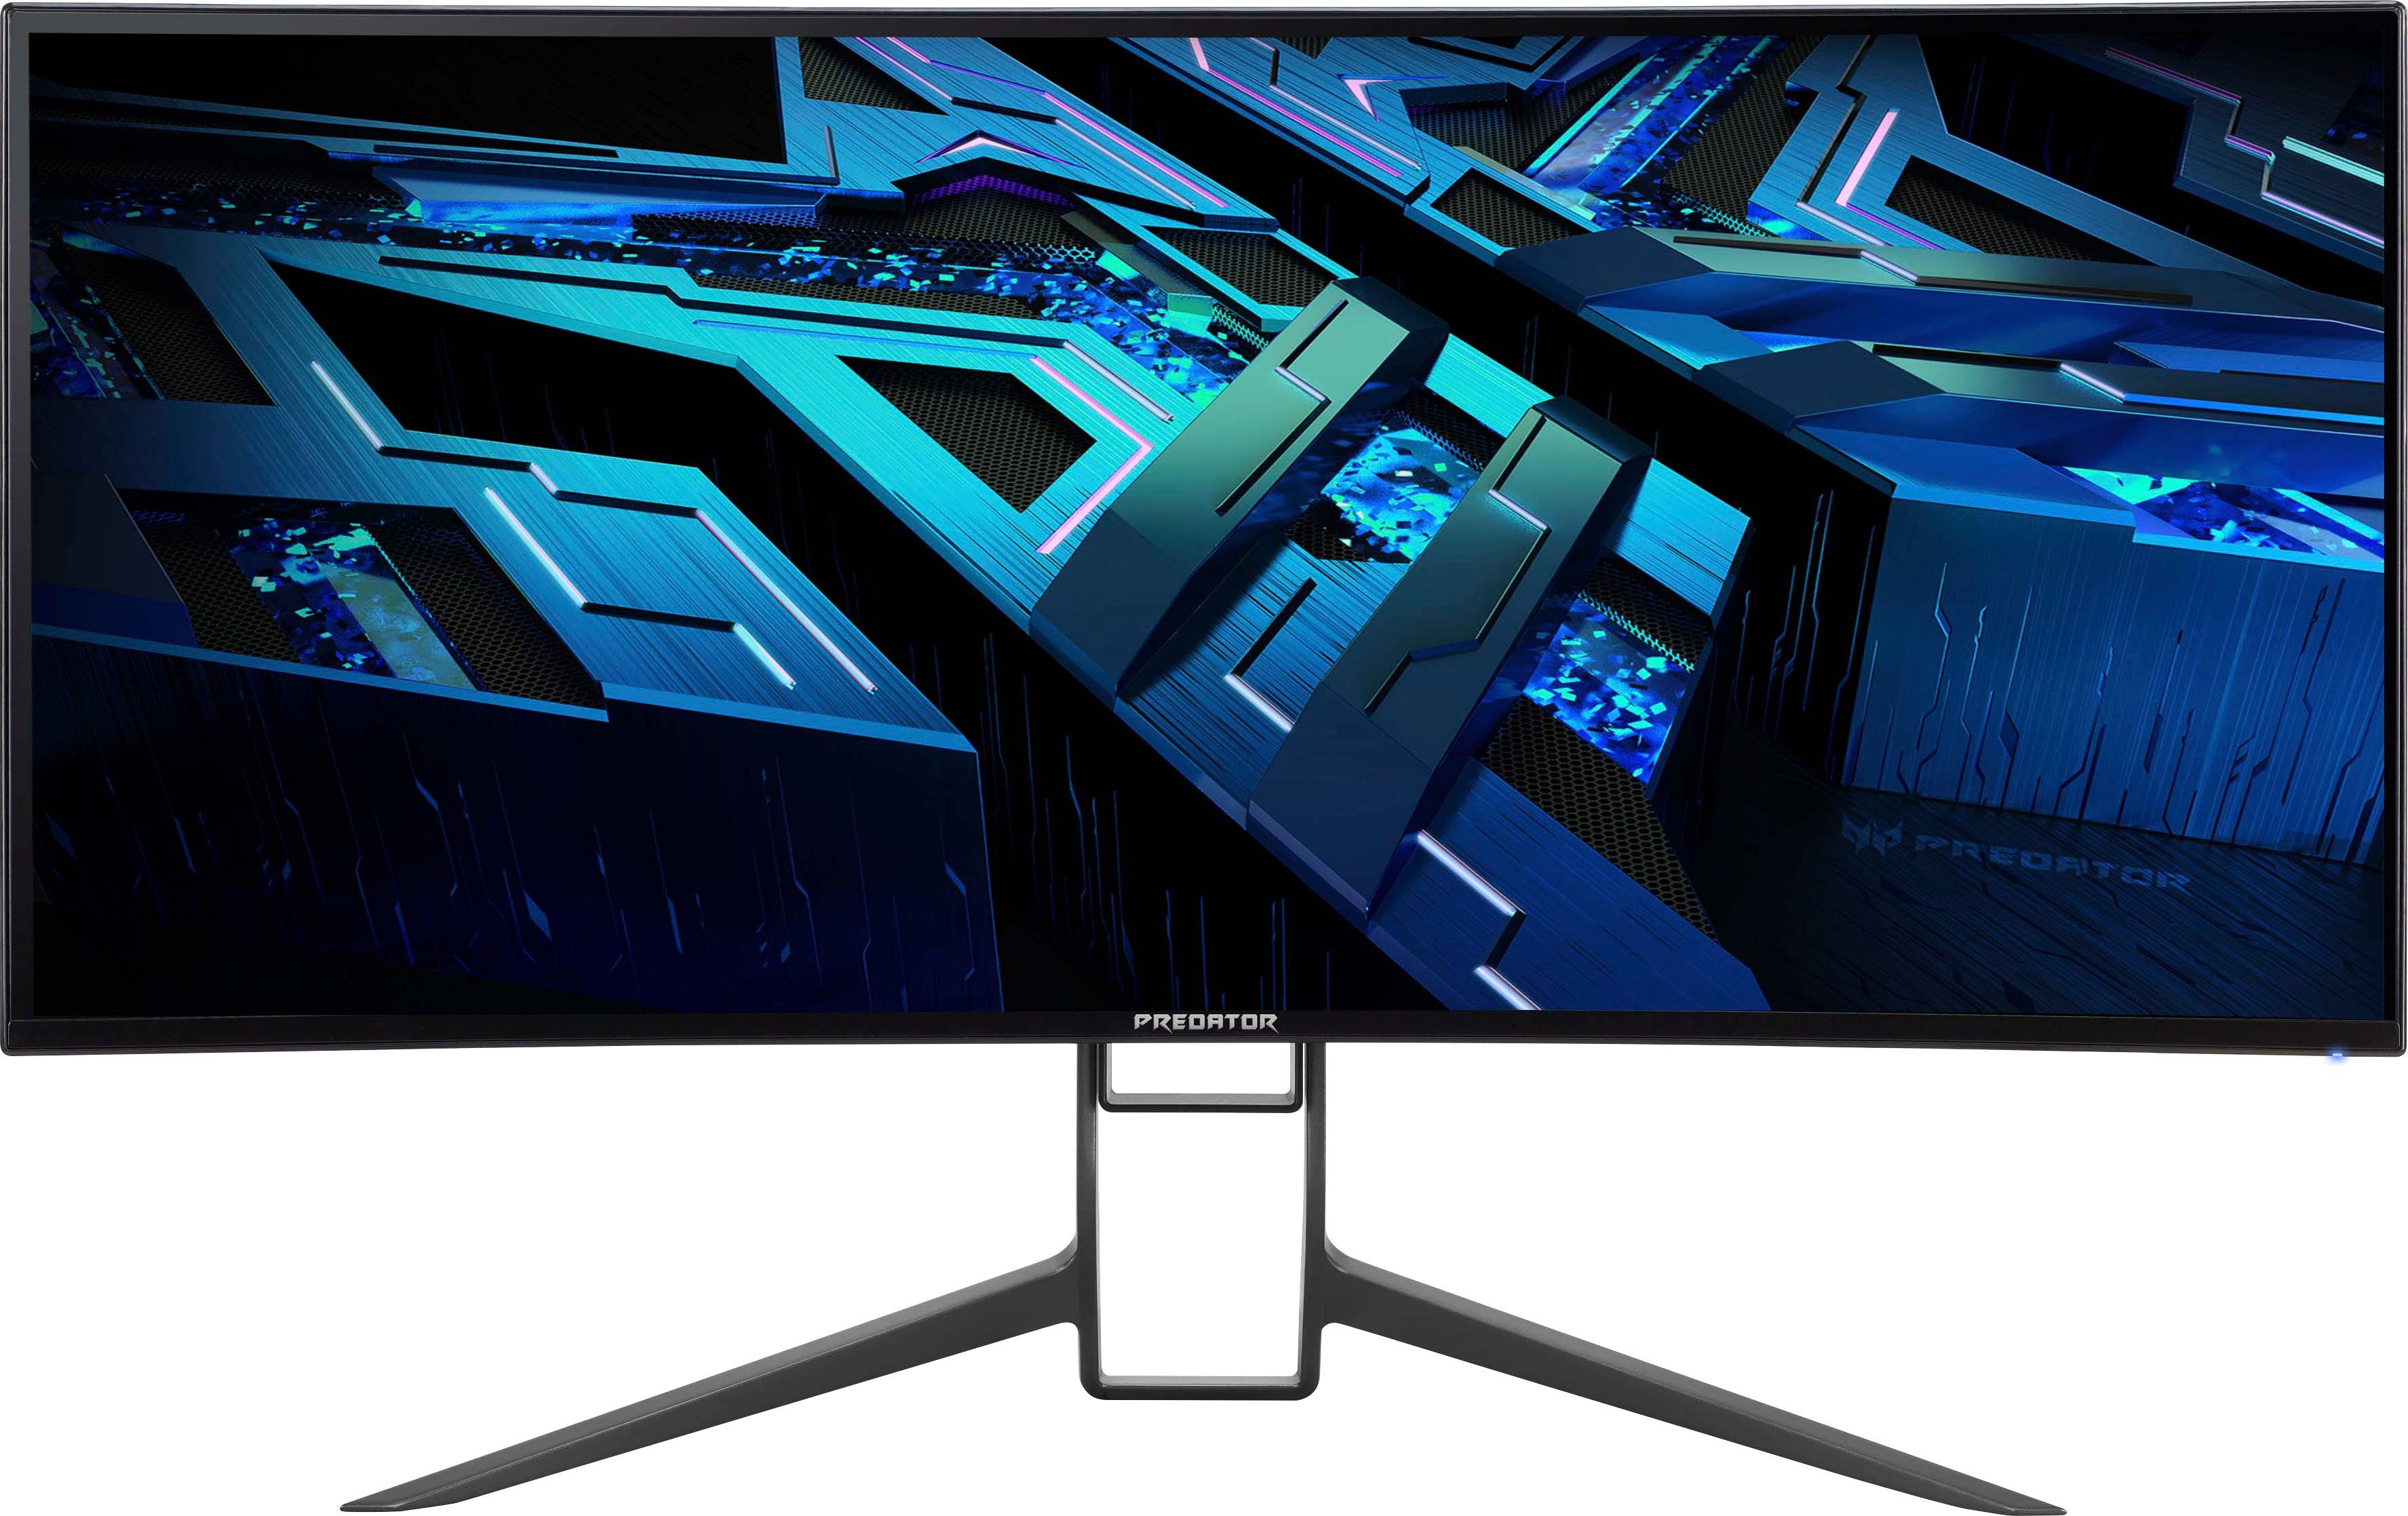 x (86,4 Predator ms 3440 ", Reaktionszeit, Acer Hz, px, IPS-LED) 0,5 Curved-Gaming-LED-Monitor cm/34 1440 180 X34GS